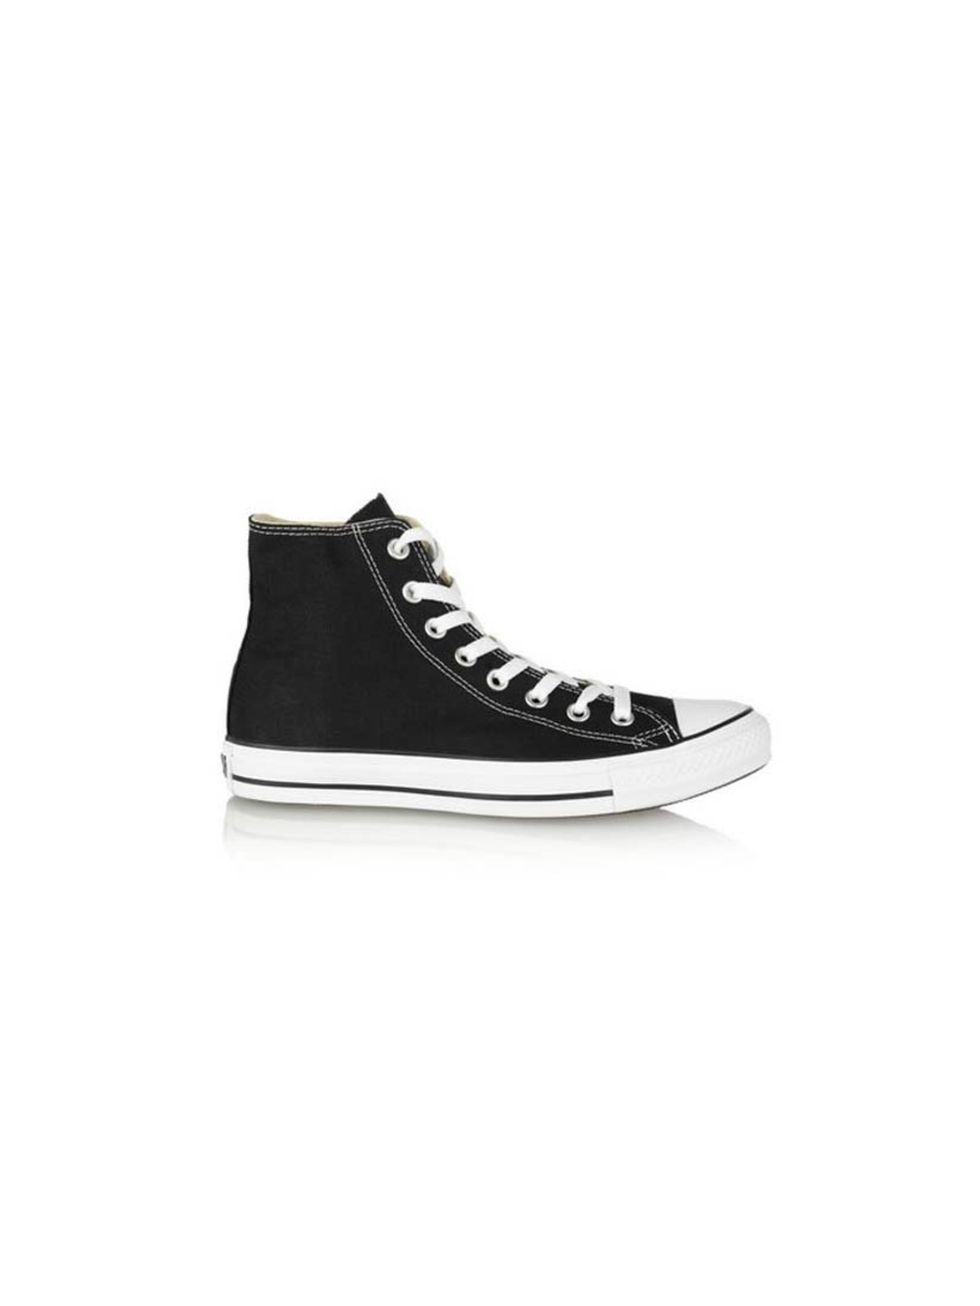 <p>Team your summer trousers with these when you are on the go.</p><p>High top sneakers by <a href="http://www.net-a-porter.com/product/311584/Converse/chuck-taylor-canvas-high-top-sneakers">Converse</a>, £45</p>